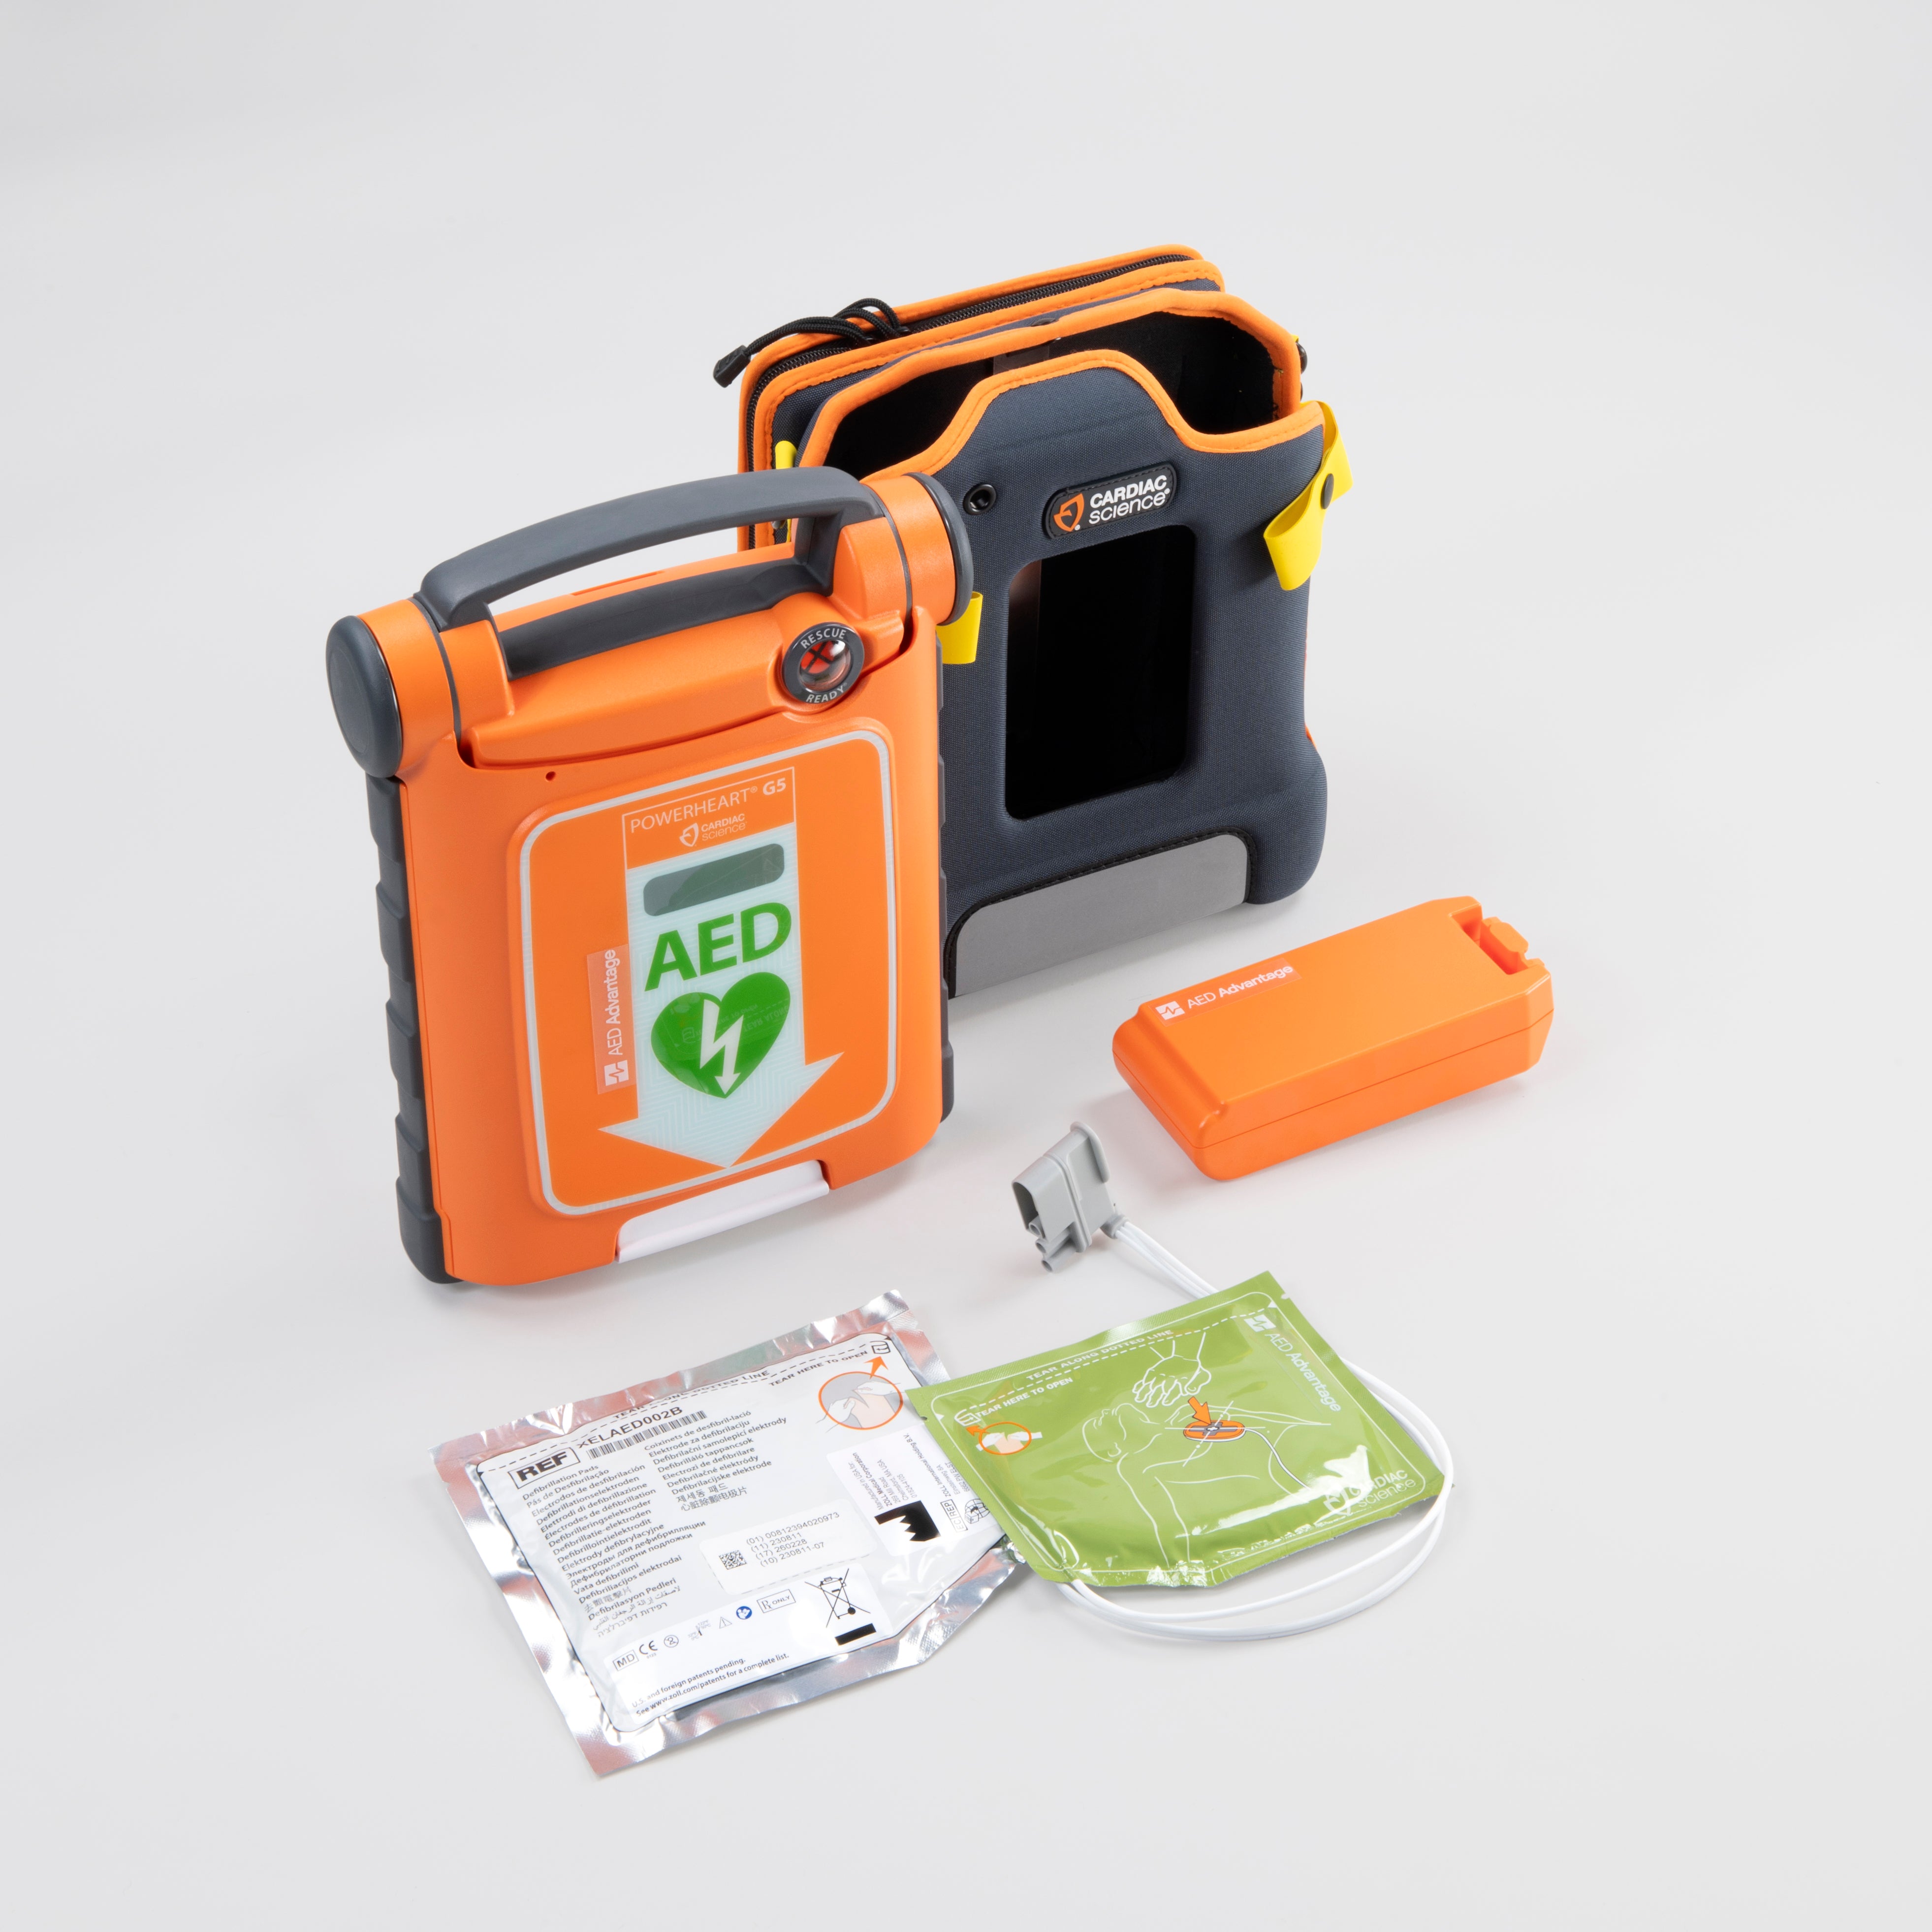 An orange Powerheart G5 AED displayed with its carry case, electrodes, and battery